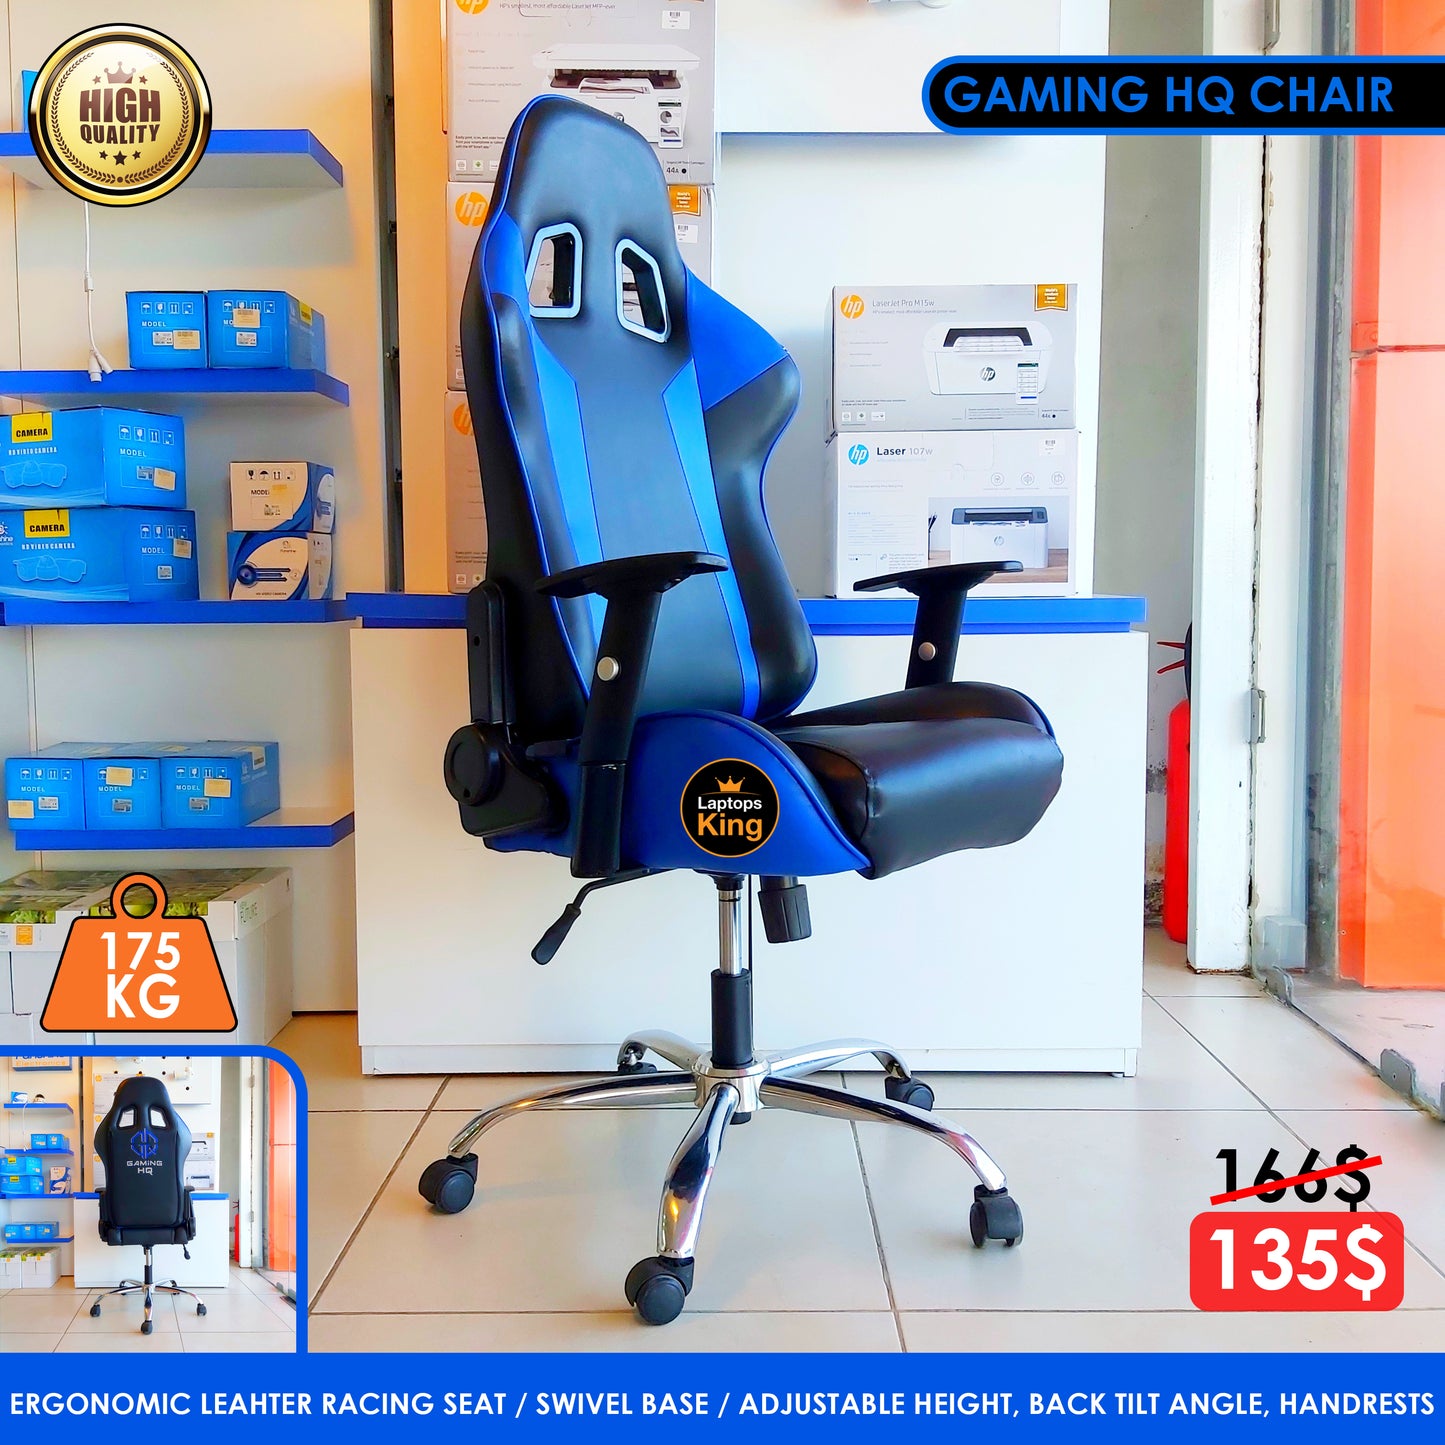 Extra High Quality Gaming HQ Chair (Used Just Like New)